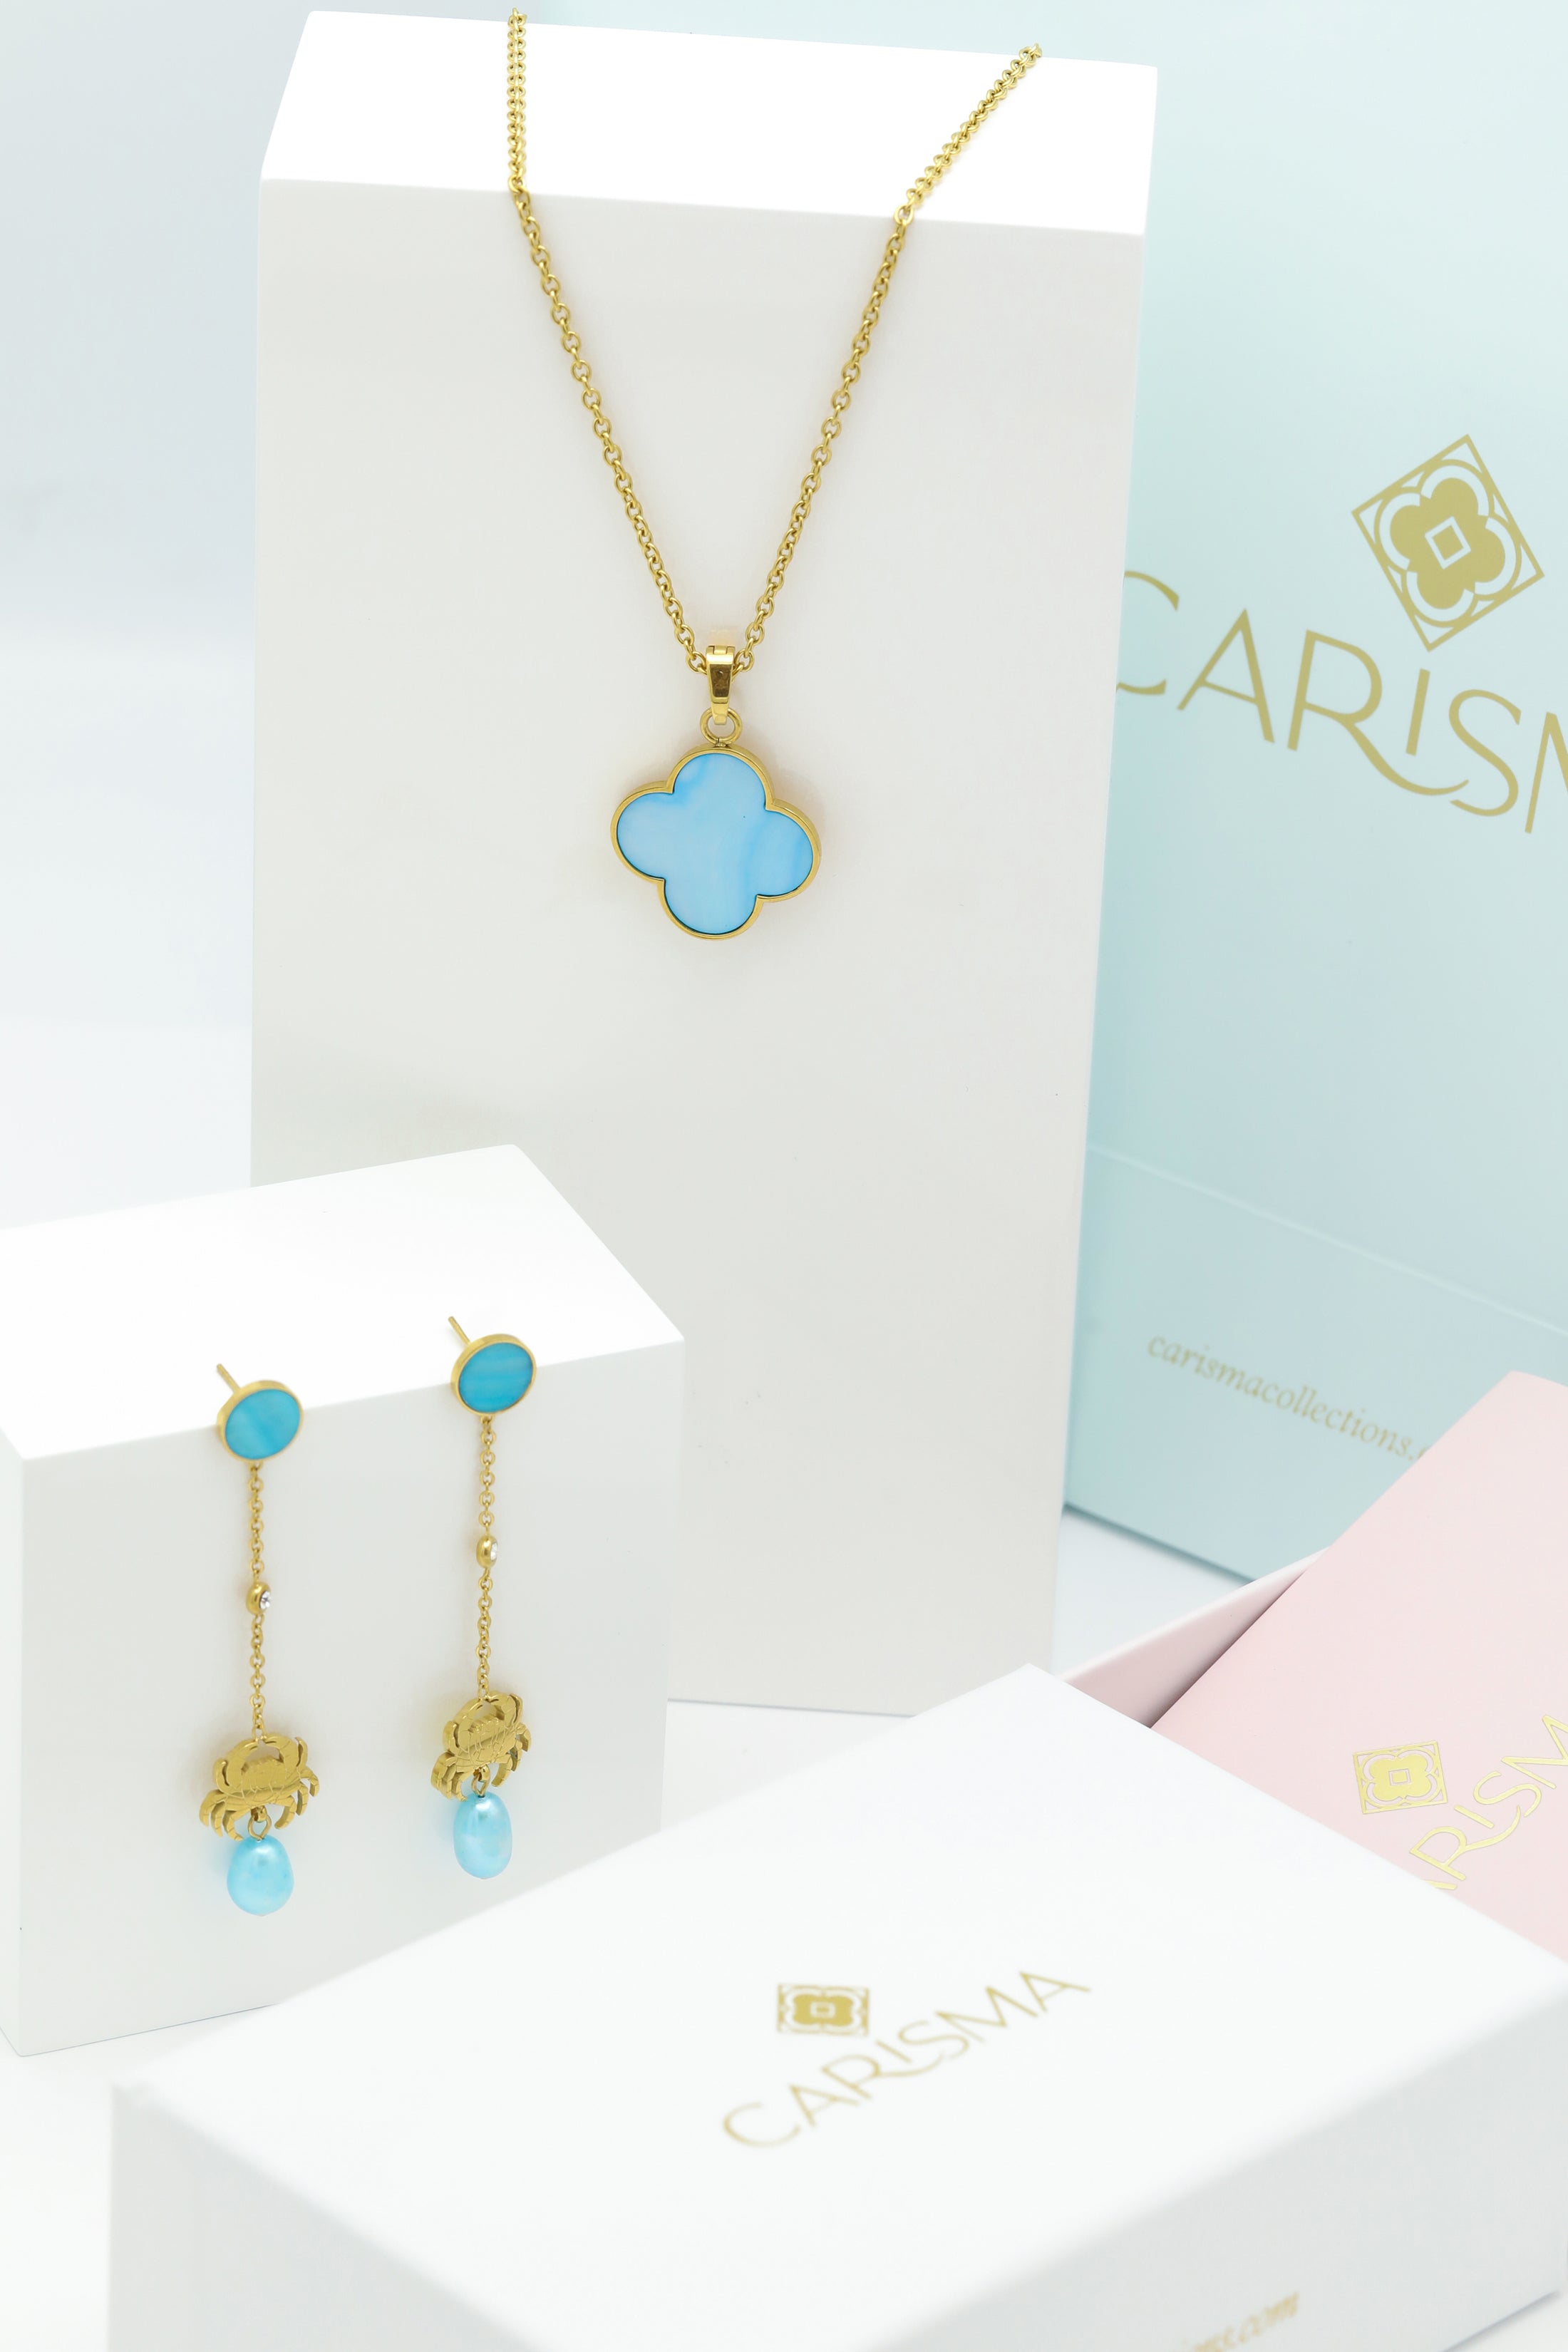 Blue Mother of Pearl Carisma Logo Necklace &amp; Qabru Blue FreshWater Pearl Drop Earrings Gift Set